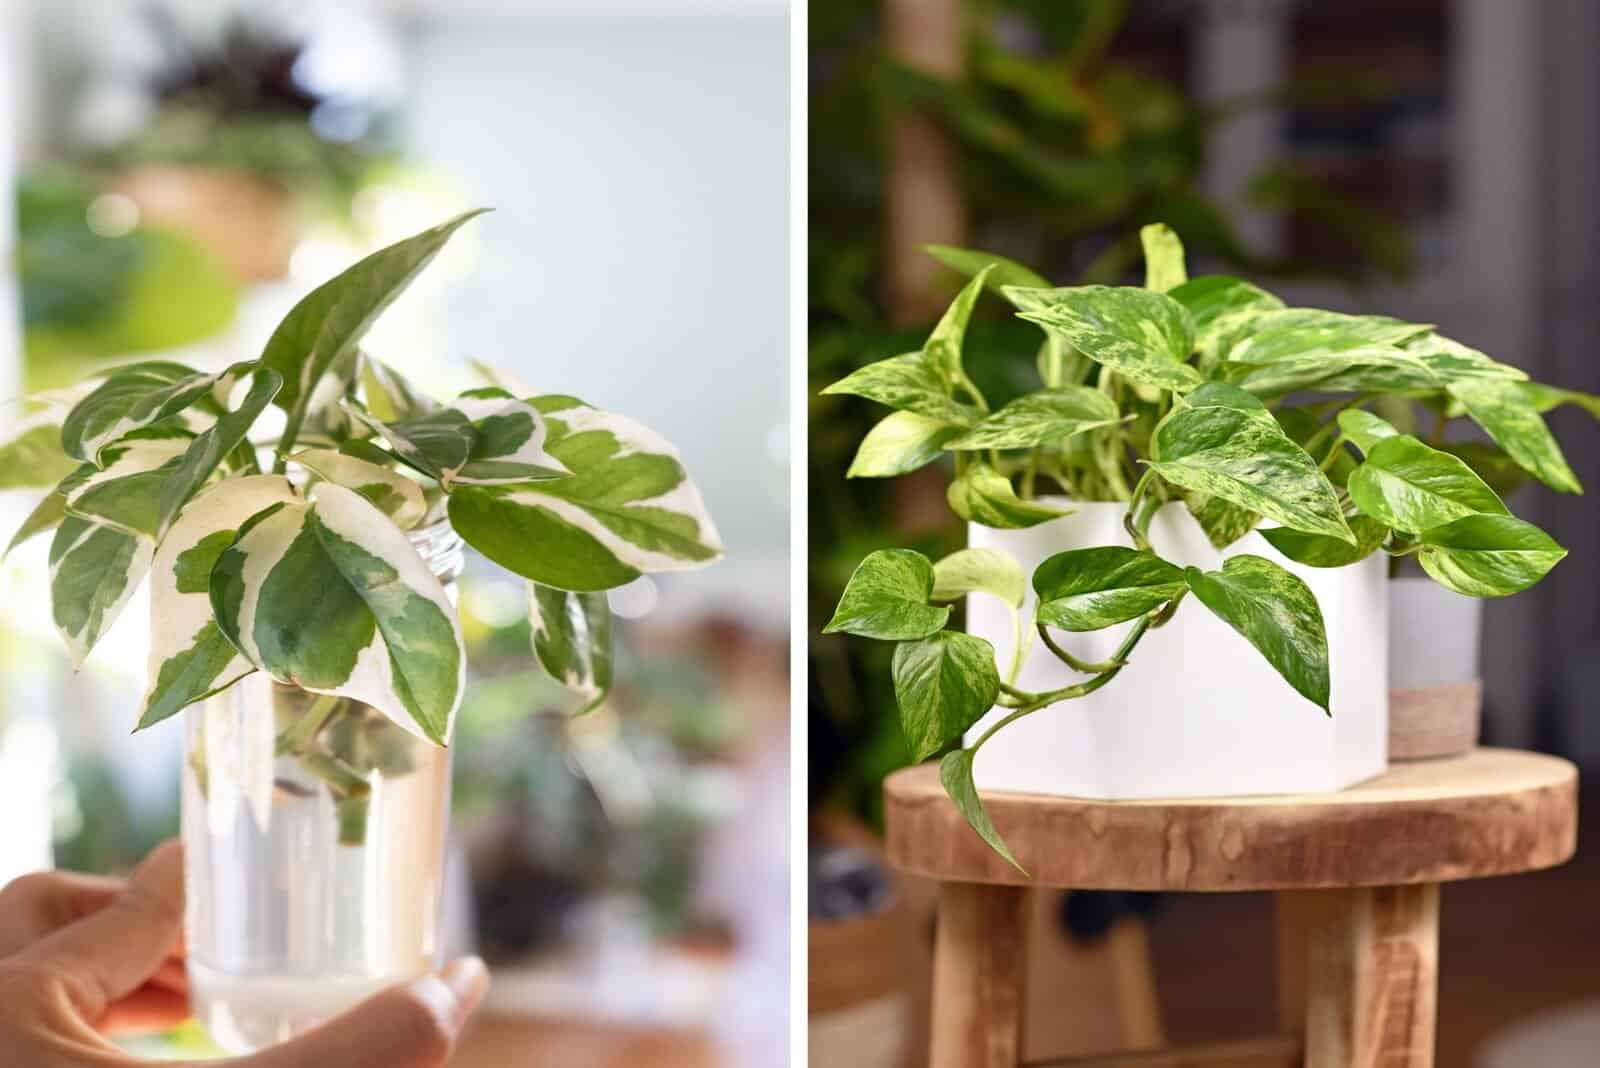 Snow Queen vs Marble Queen Pothos: Differences And Care Guide